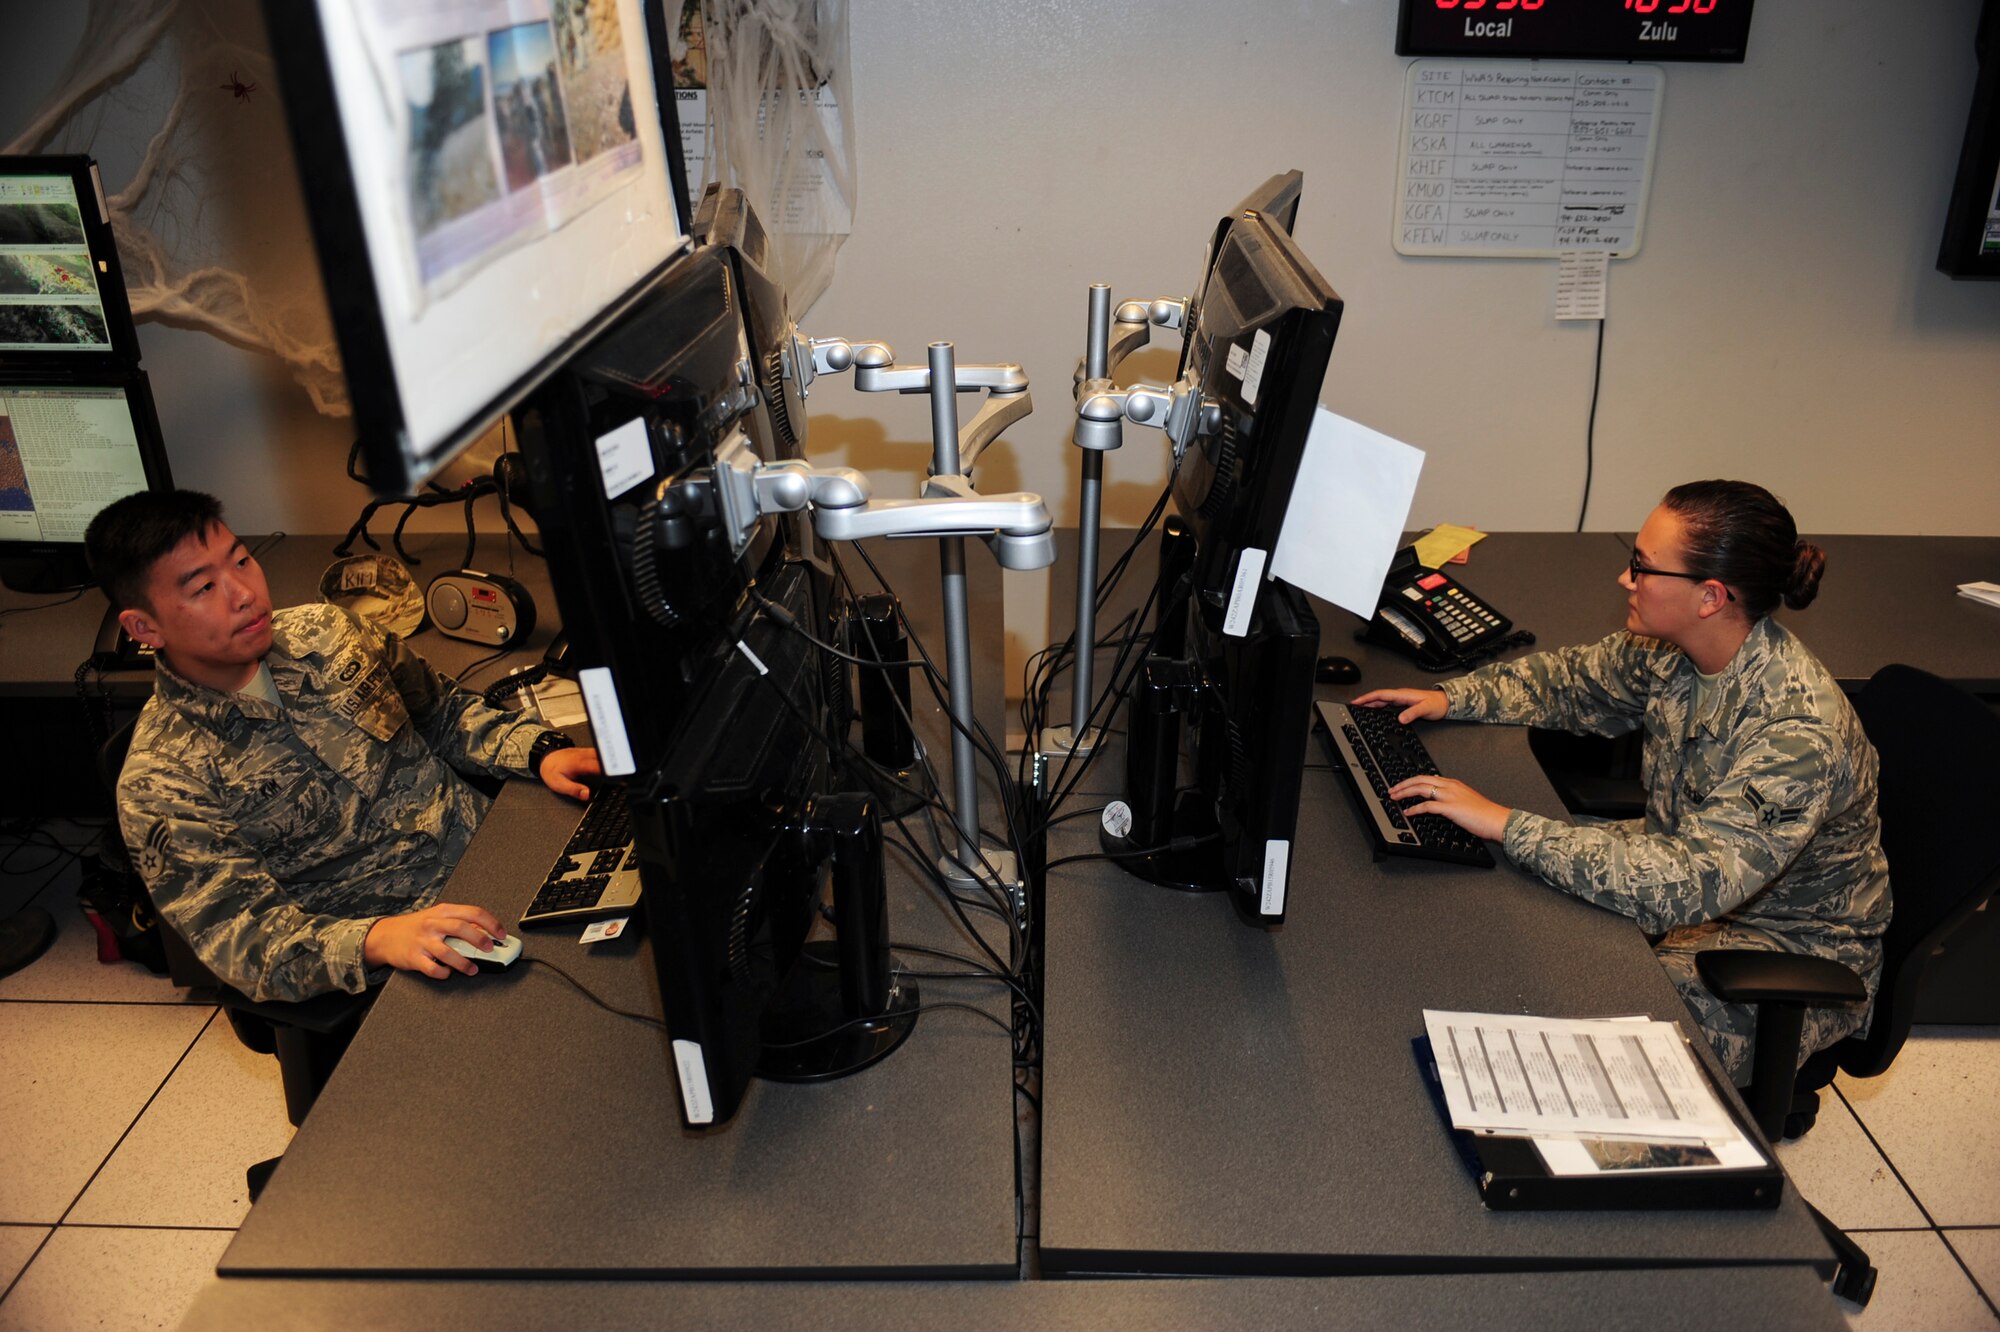 U.S. Air Force Senior Airmen James Kim and Airman 1st Class Ariel Hawkins, 25th Operational Weather Squadron weather forecasters, monitor weather conditions at Davis-Monthan Air Force Base, Ariz., Oct. 29, 2015. The 25th OWS operations floor is divided into north, south and central sections, forecasting the weather for the Western part of the Continental U.S. (U.S. Air Force photo by Airman Basic Nathan H. Barbour/Released)